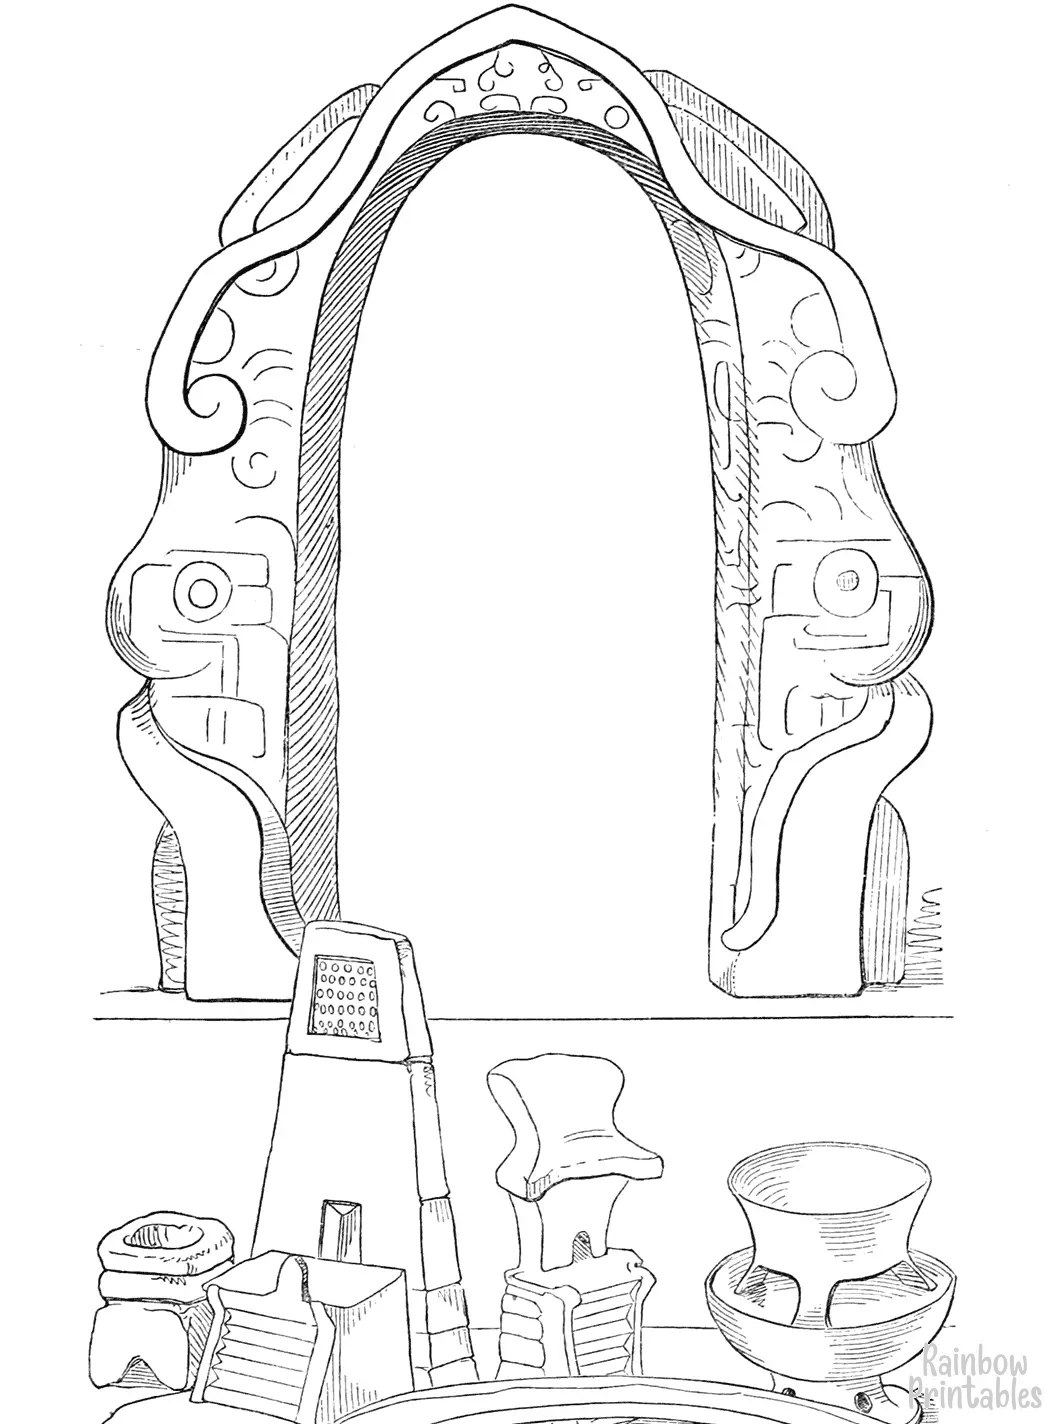 yoke-knife-small-vases-and-altars-used-in-aztec-sacrifices-coloring-page